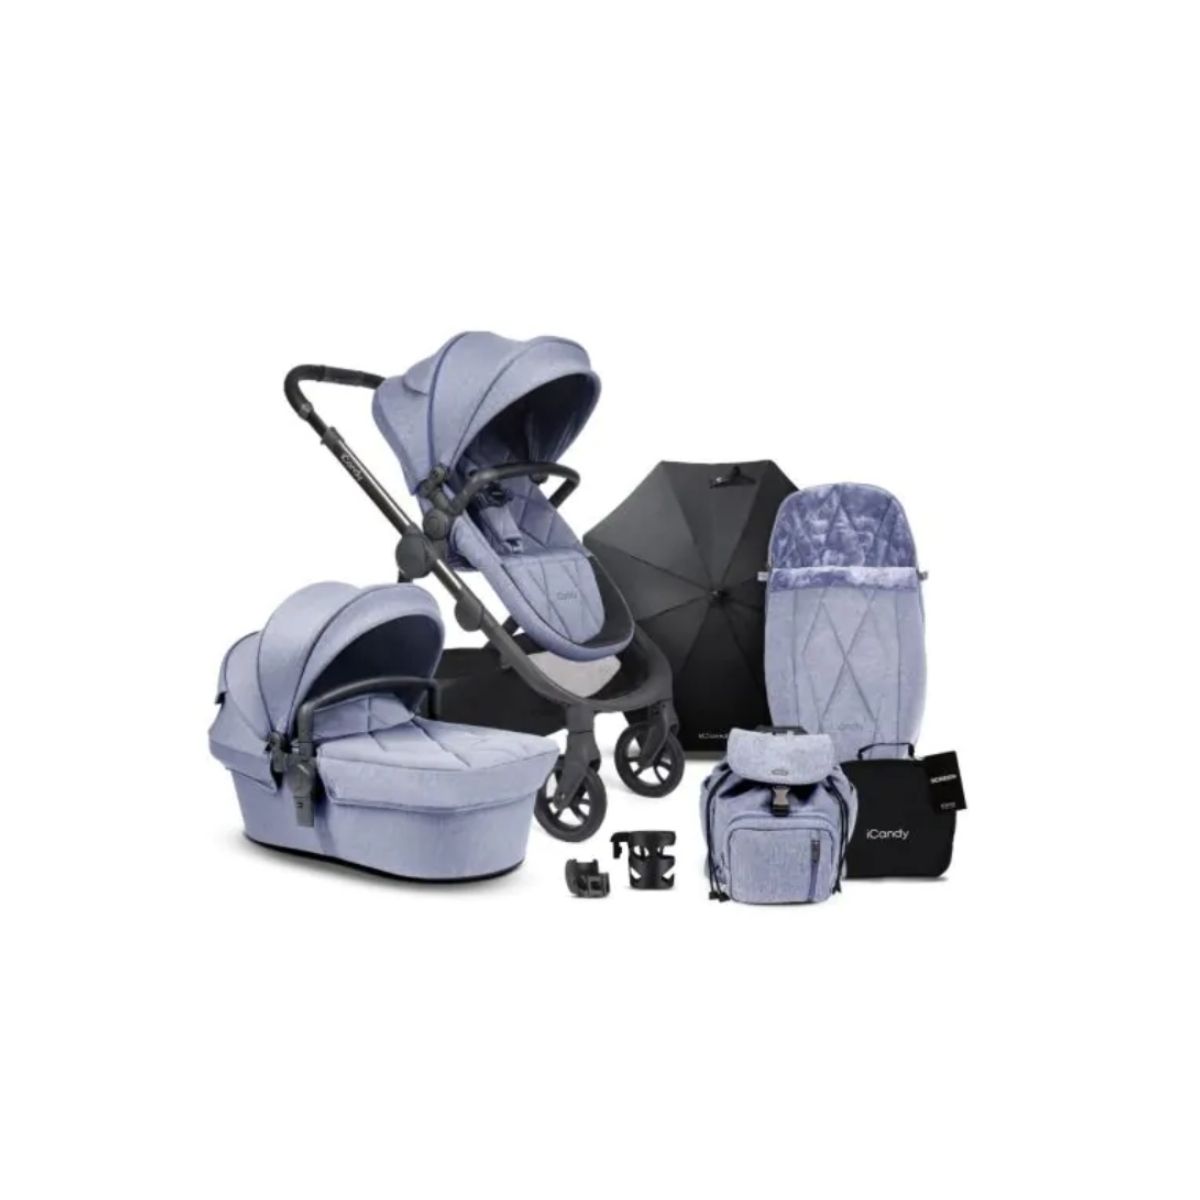 iCandy Orange Pushchair and Carrycot Complete Bundle